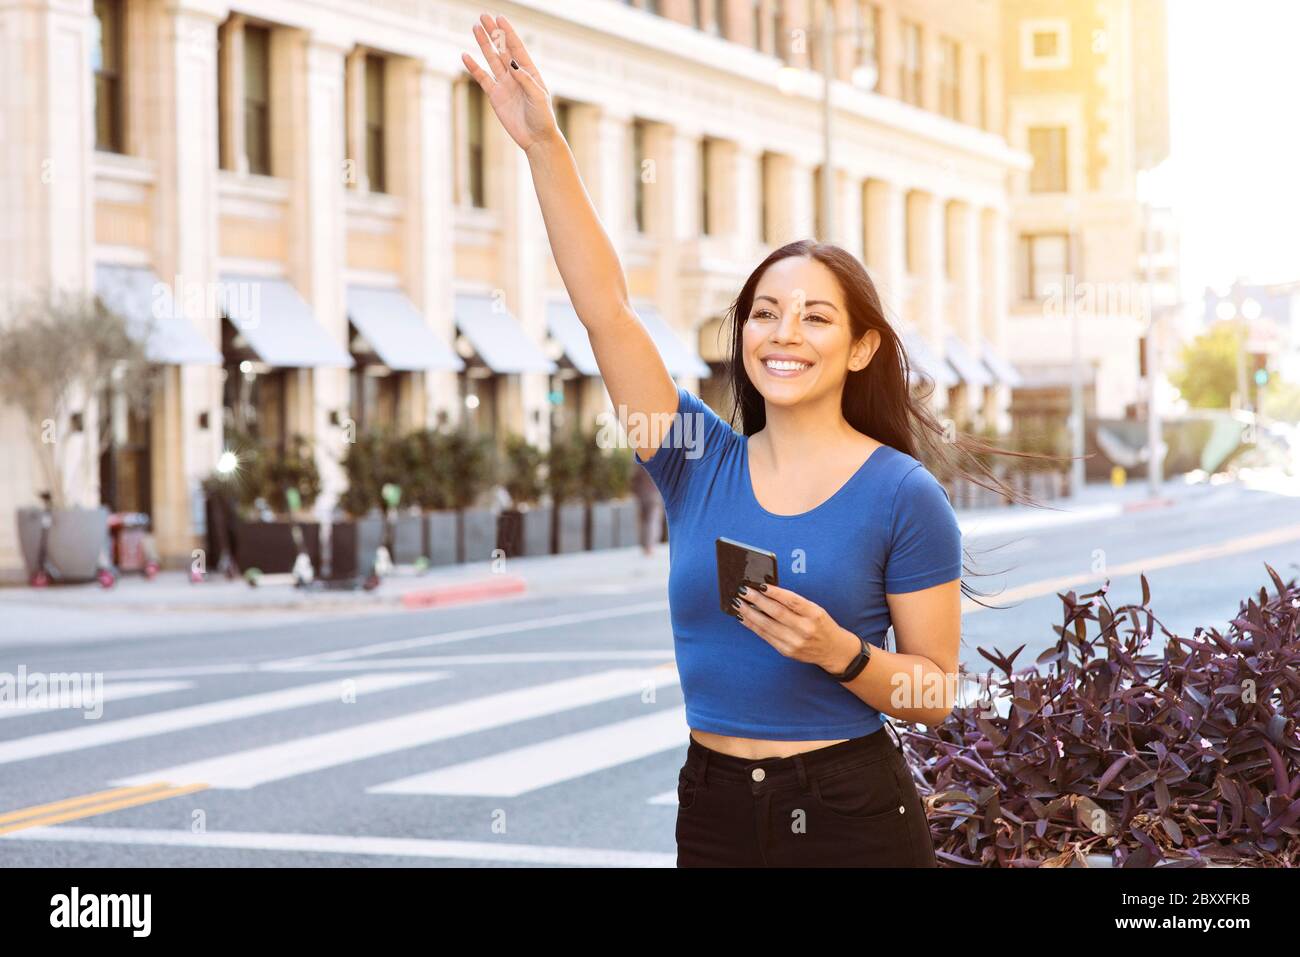 Young woman of color waves her hand to call a ride share in the City - Uber - Lyft - Daytime Stock Photo